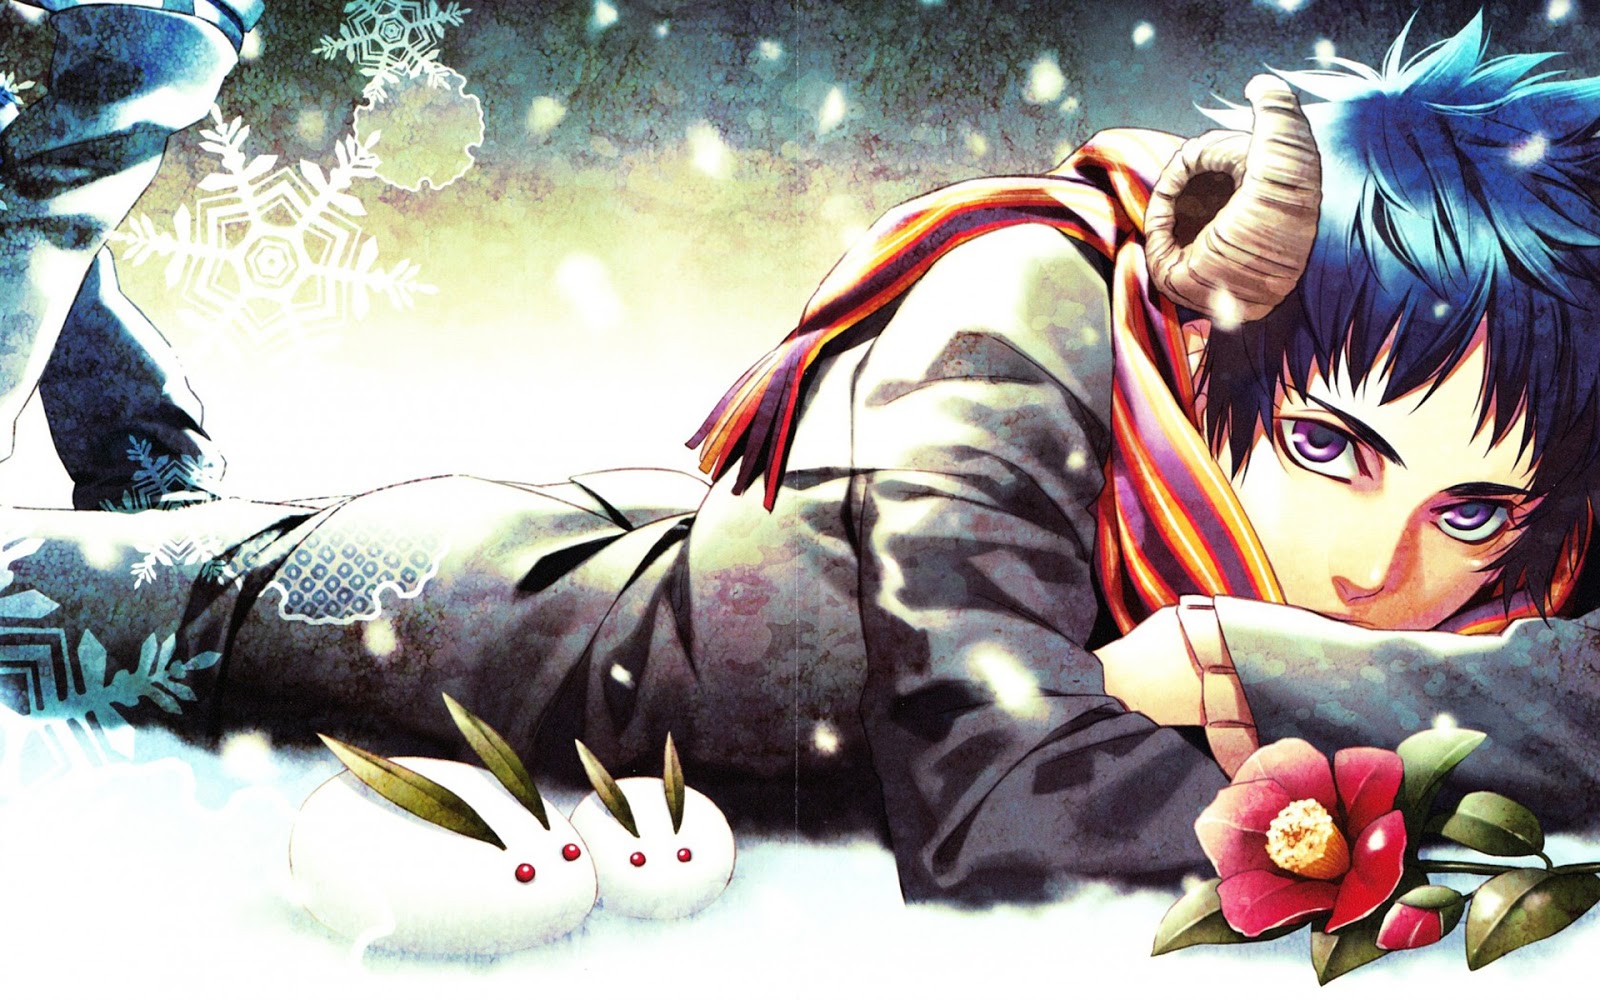 Male+Guy+Horn+Snowflakes+Snow+scarf+Anime+HD+Wallpaper+Photo+Image+Picture+Backgrounds.jpg